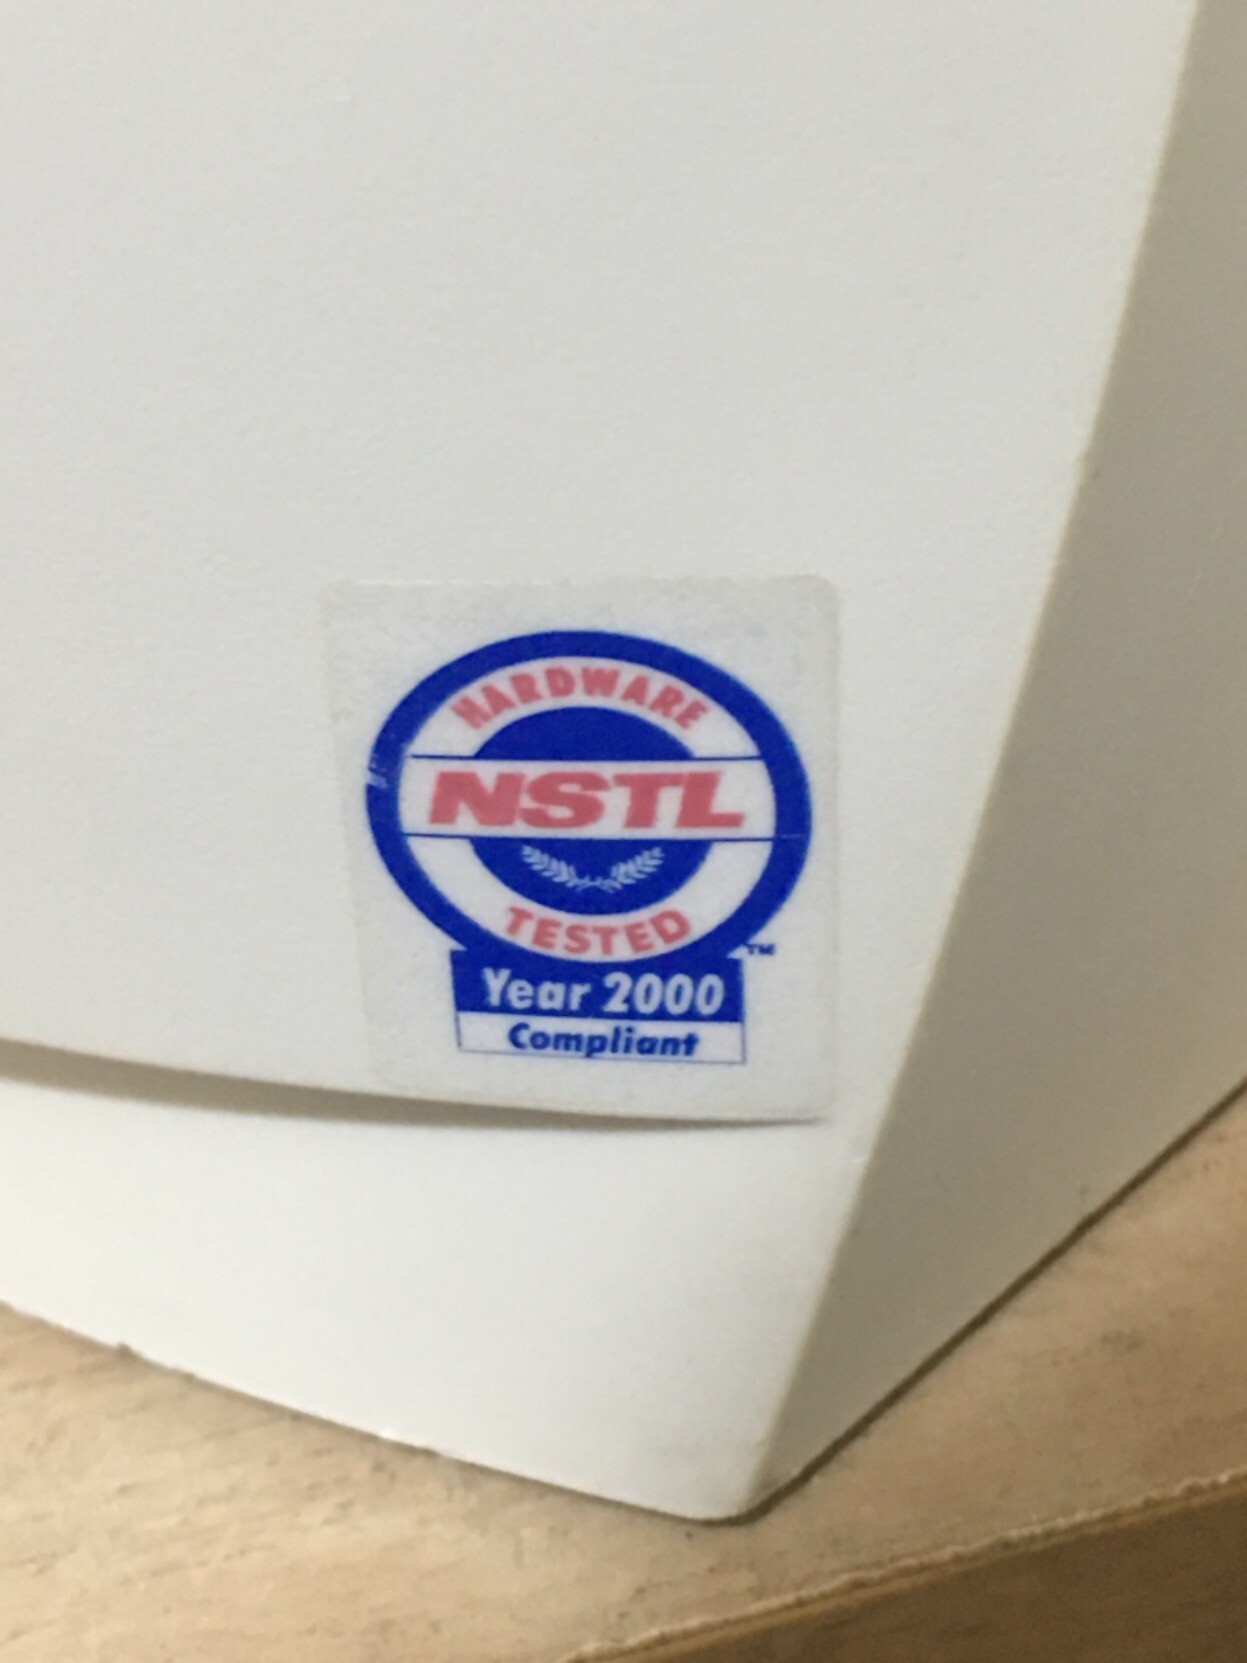 The case also has a Year 2000 Compliant sticker.